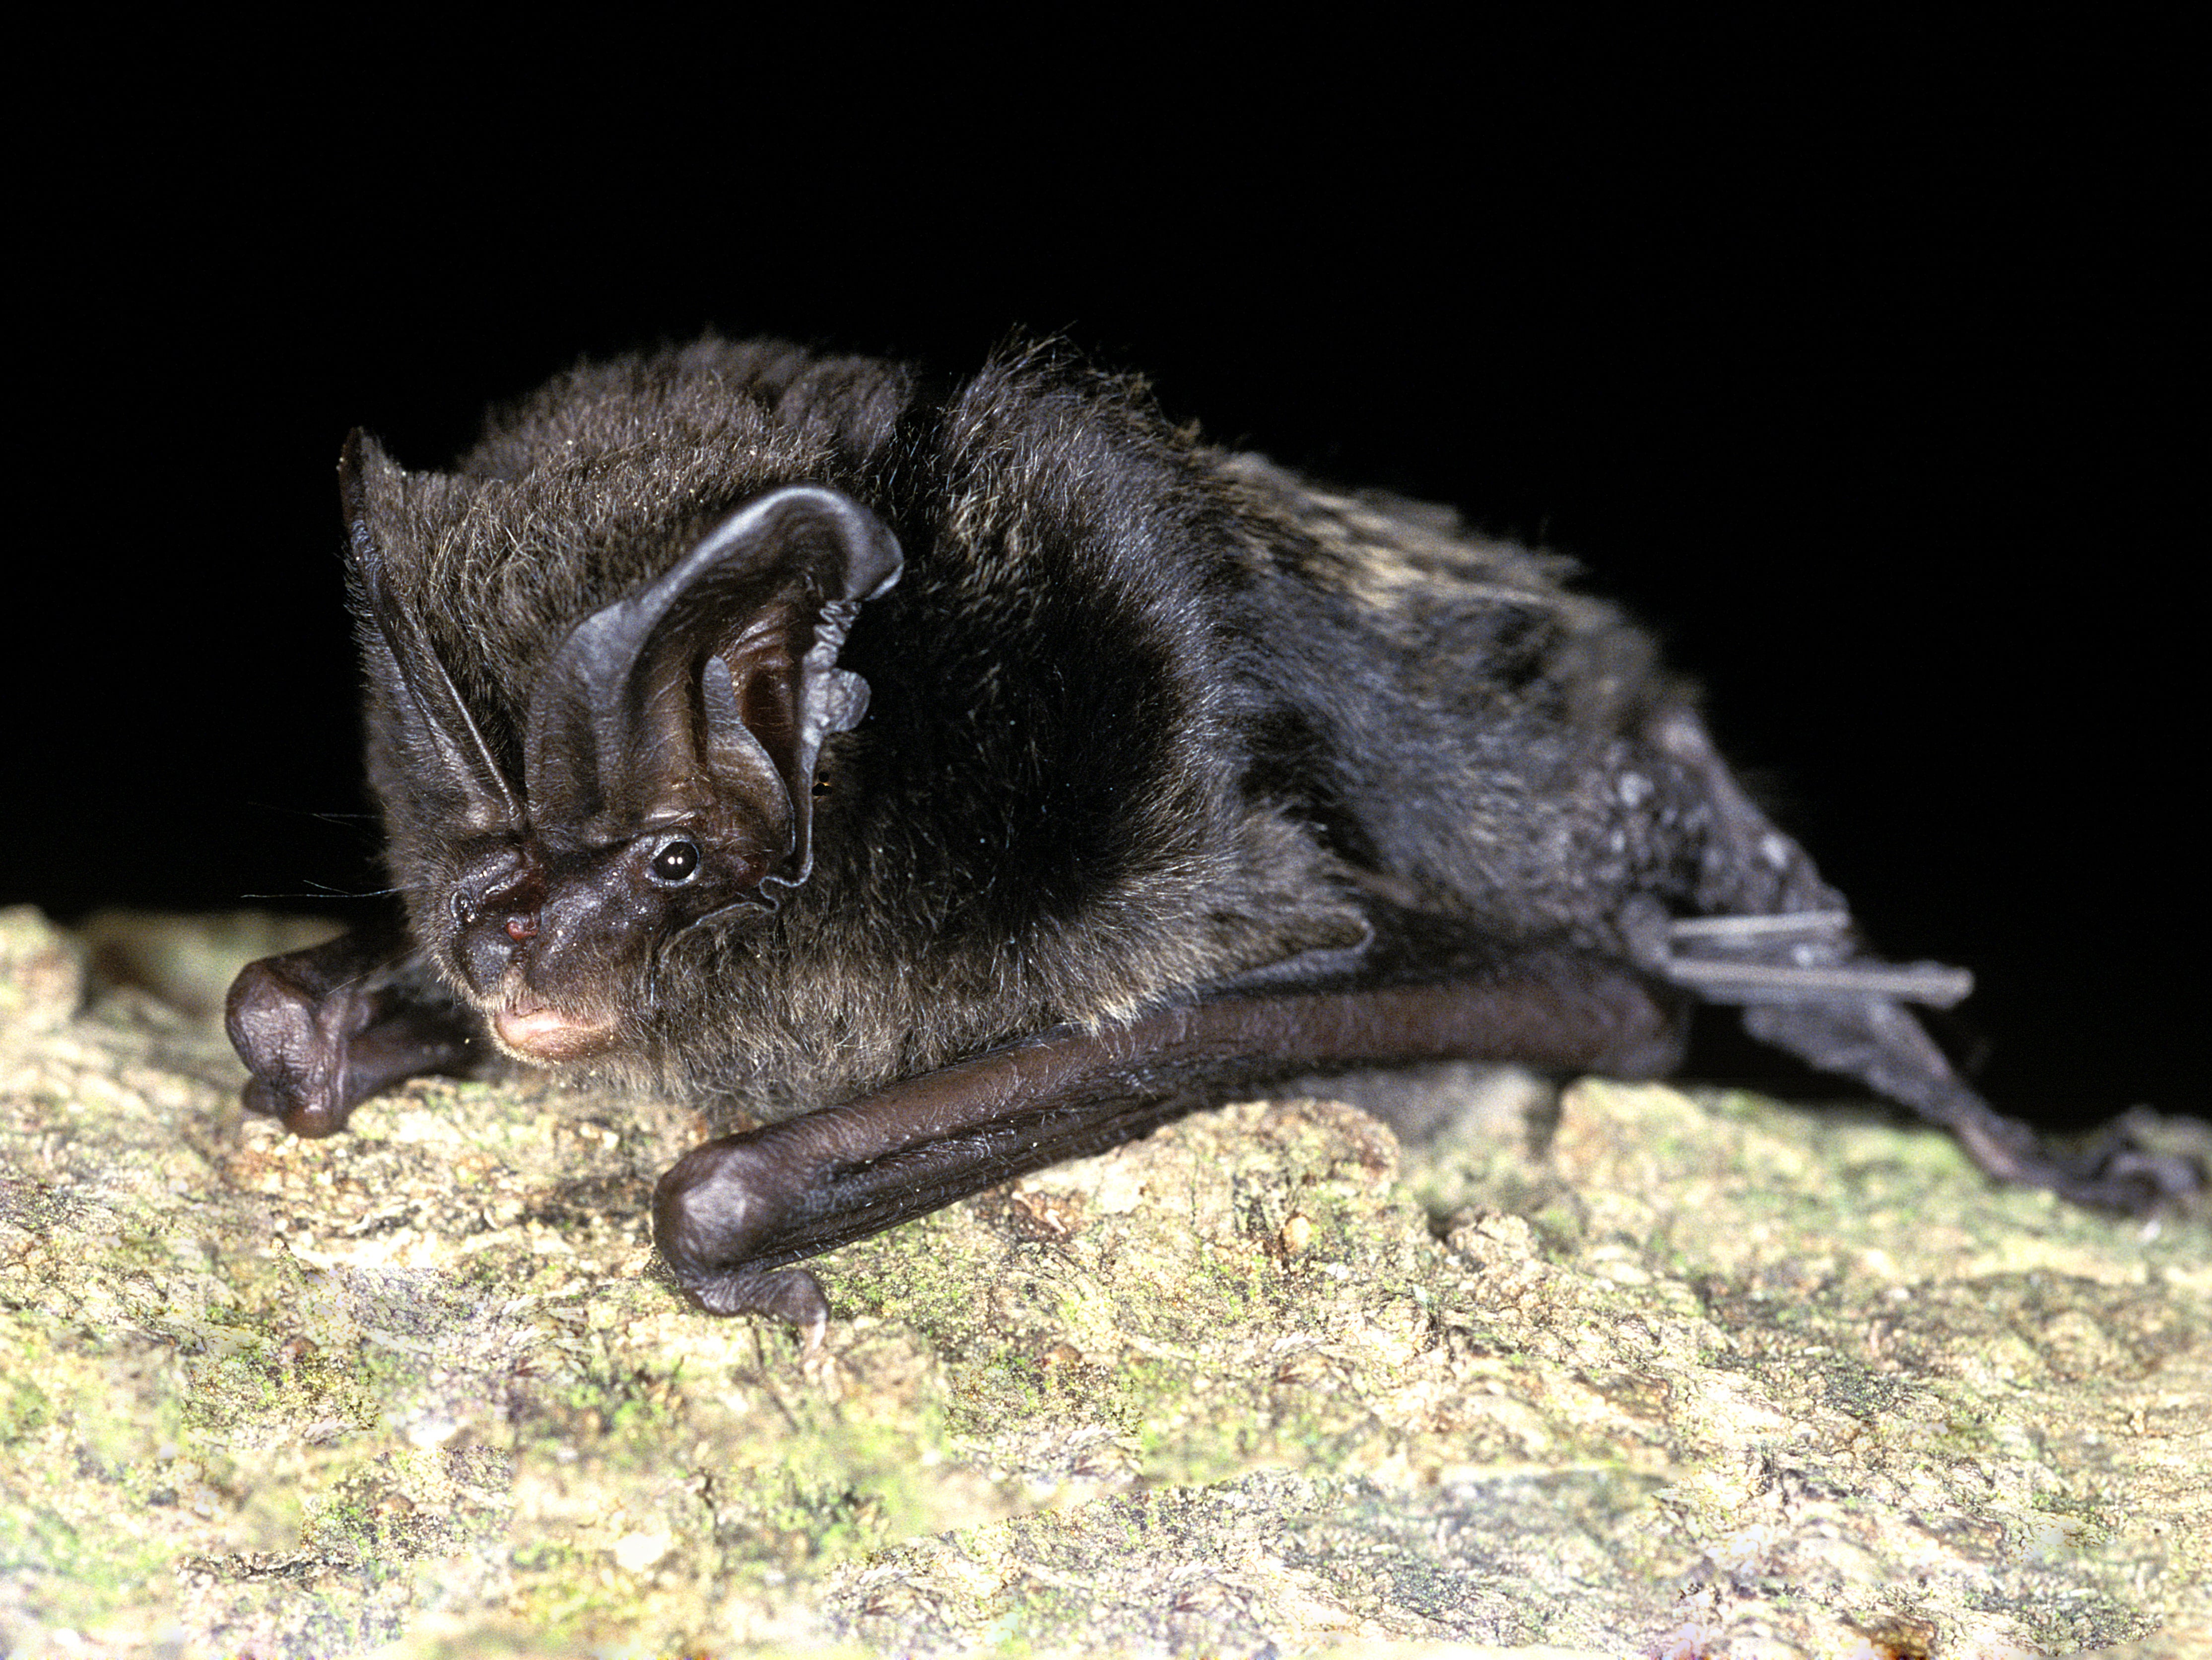 Caves and abandoned stone quarries on the 350-acre Weston Farm site are home to 15 of Britain’s native bat species, including the rare barbastelle bat